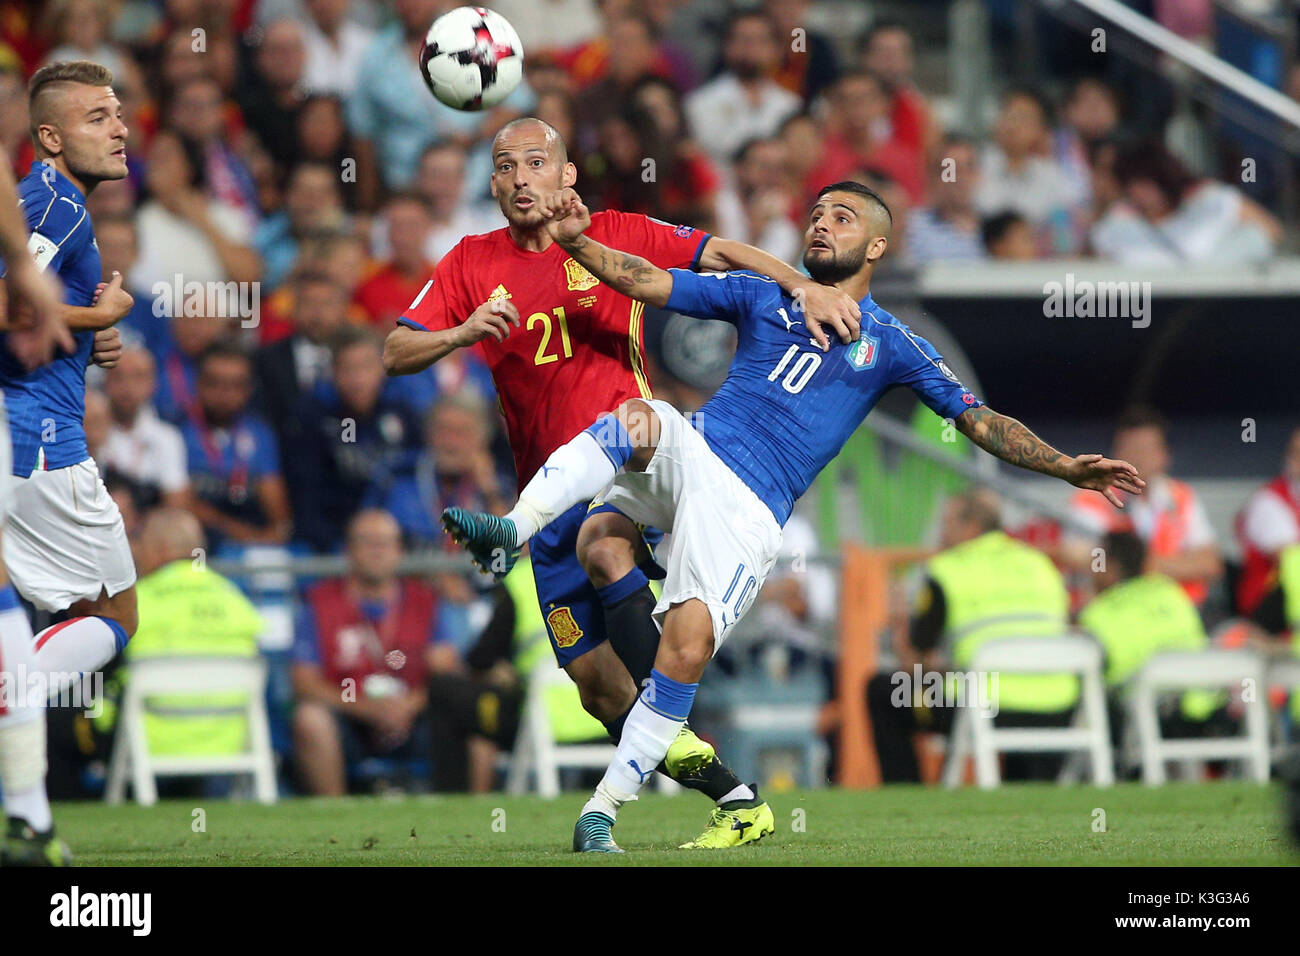 Madrid, Spain. 2nd September, 2017. World Cup qualifiers Russia 2018. Group G. Match between Spain vs Italy. David Silva and Insigne in action during the match. Credit: Independent Photo Agency Srl/Alamy Live News Stock Photo